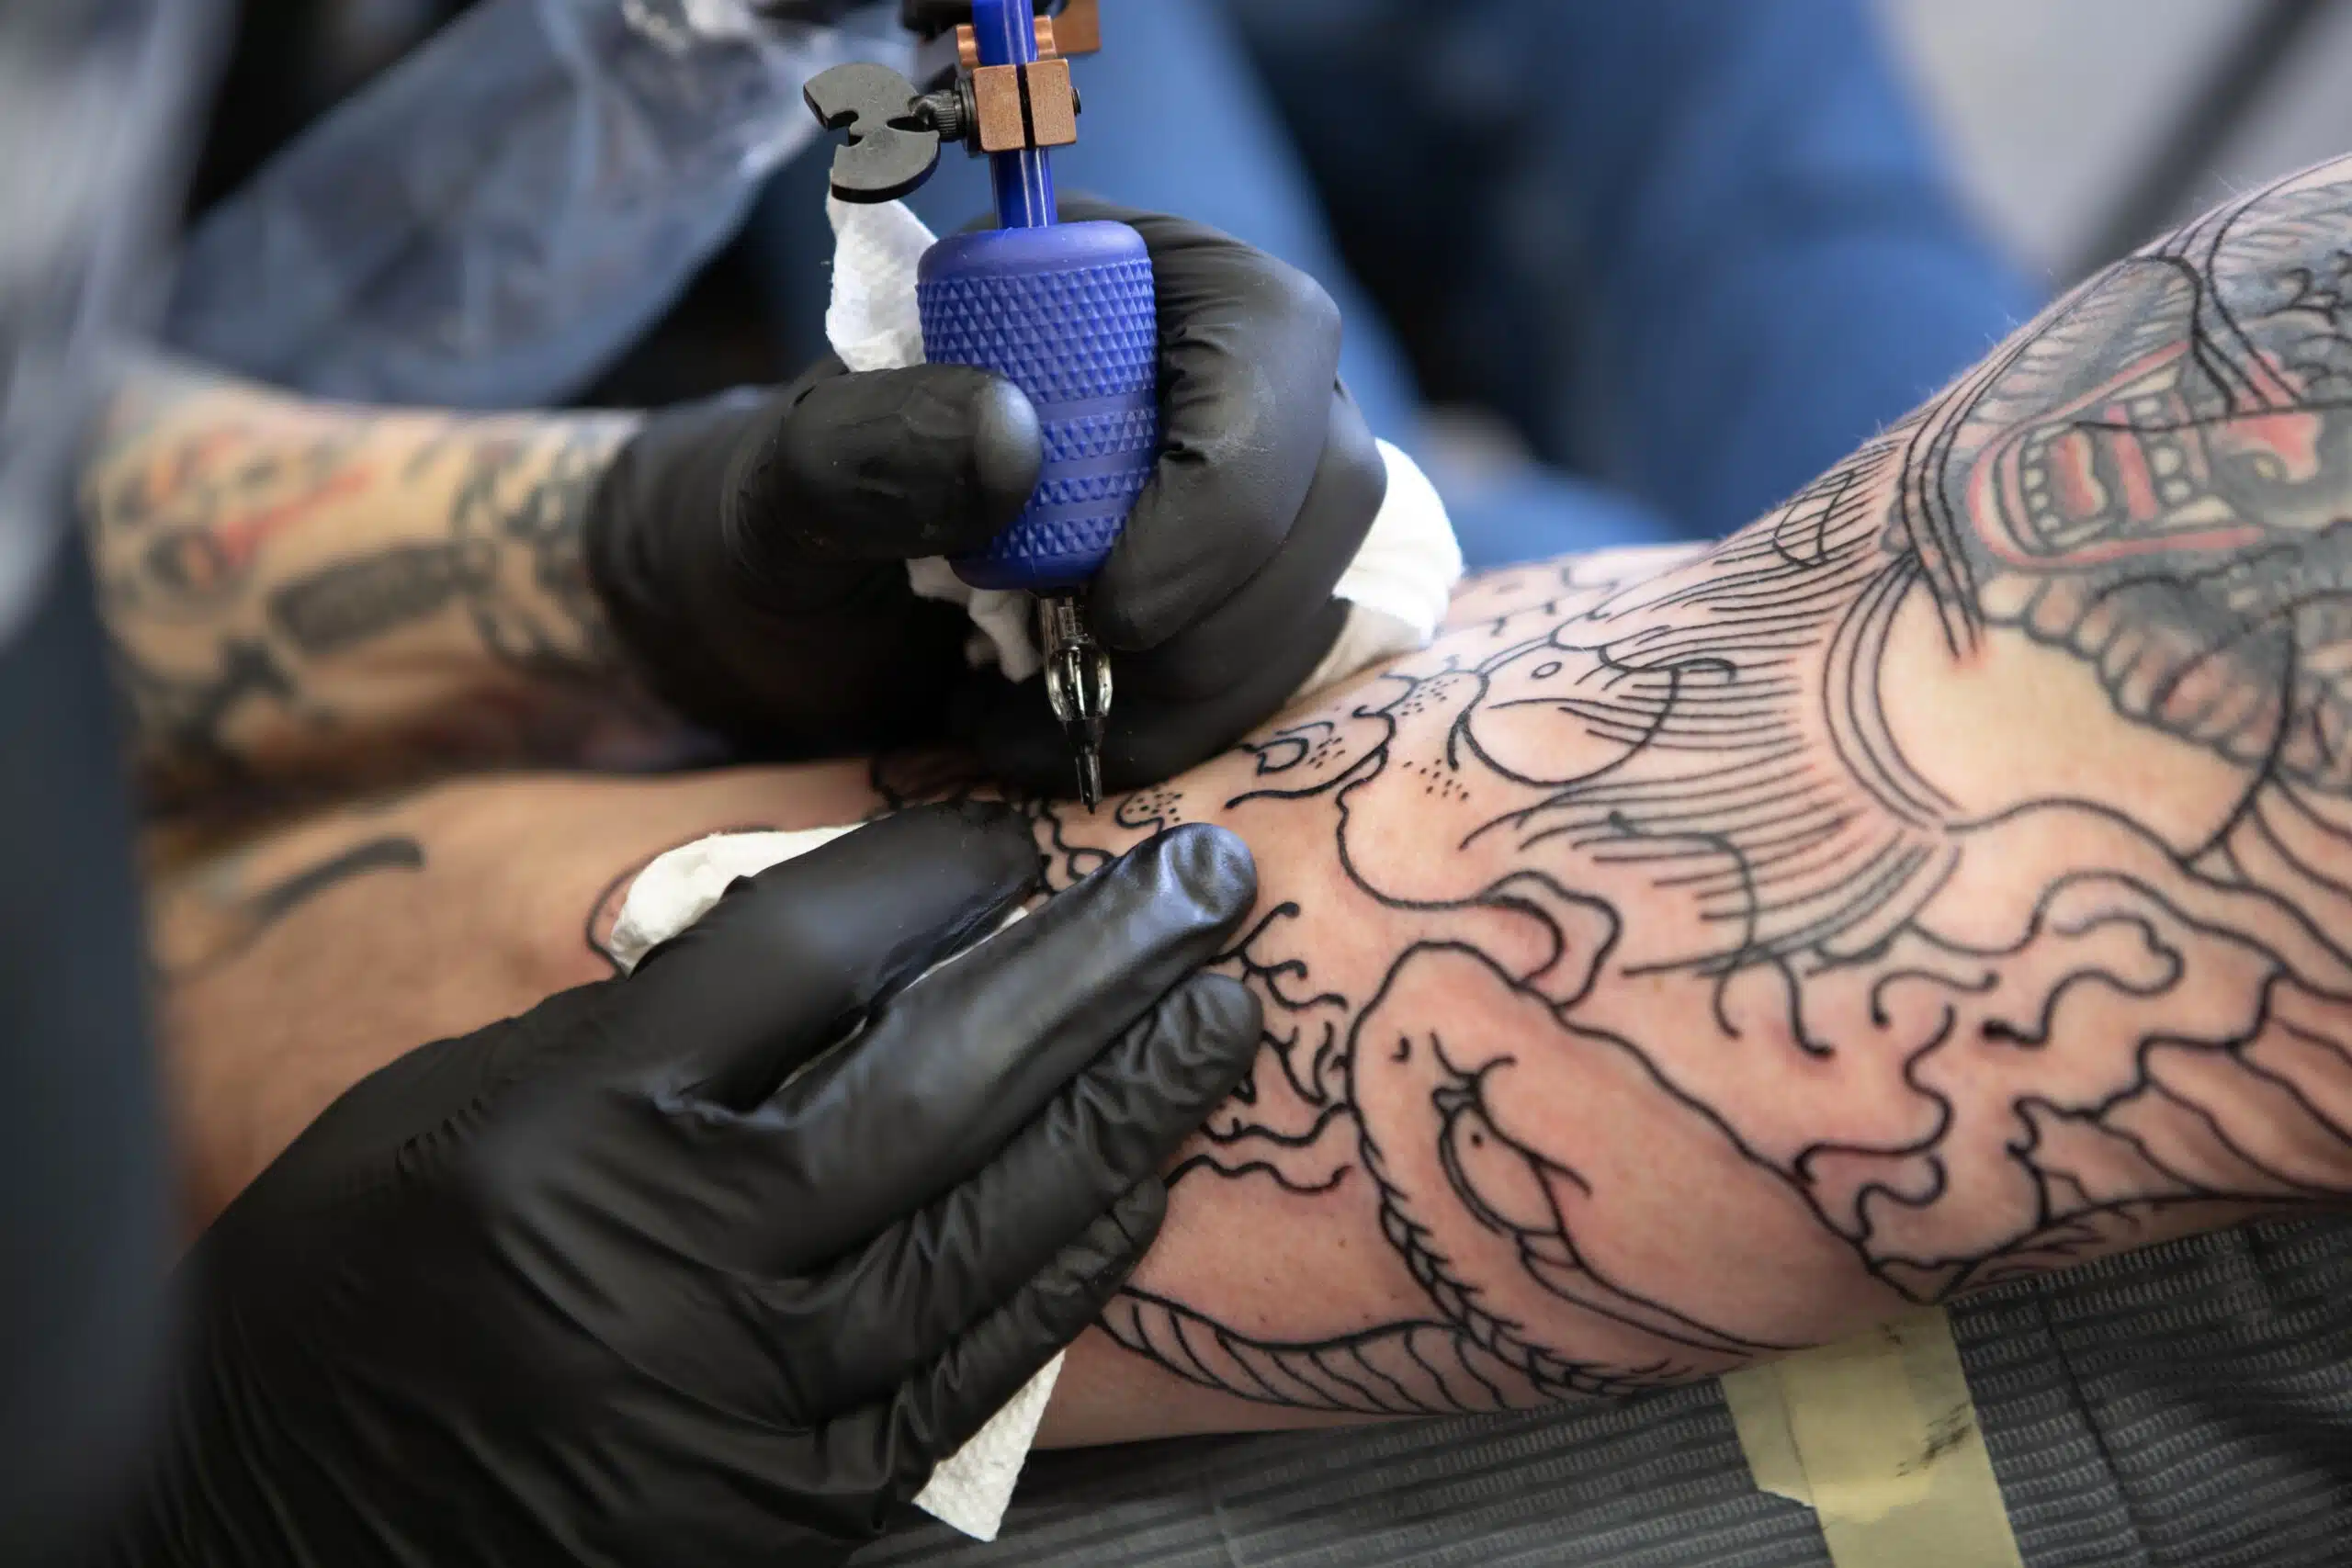 Tattoo Removal In India | AKJ Skin And Laser Centre